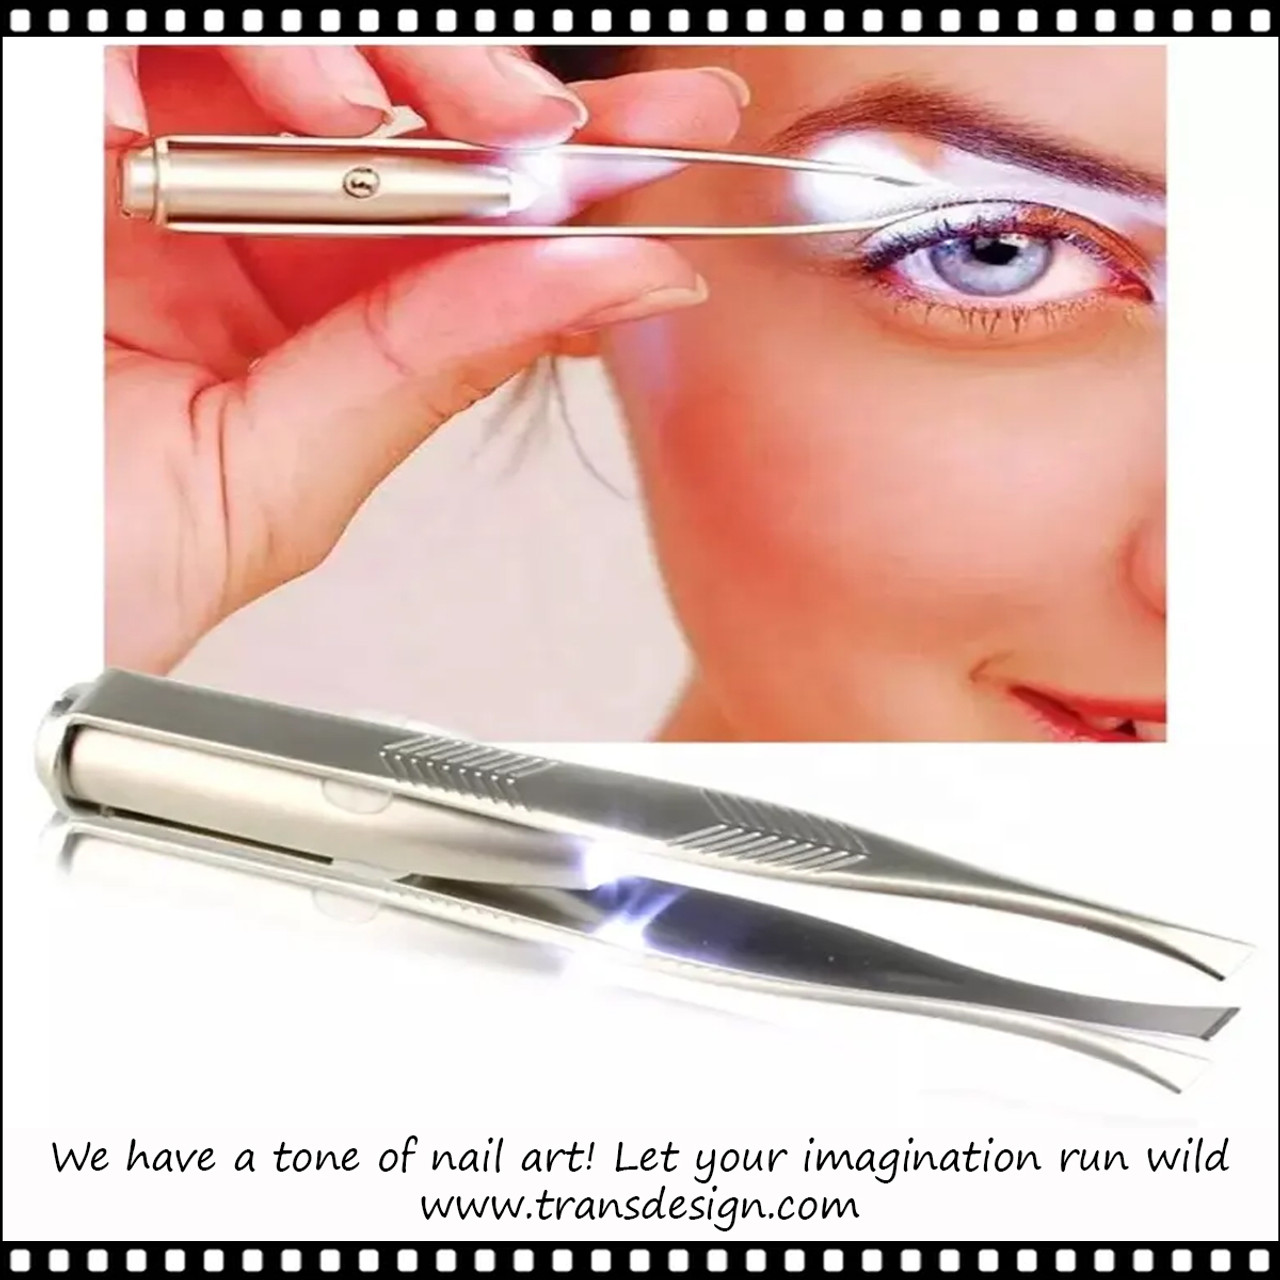 Makeup, New Led Lighted Tweezers Button Cell Batteries Included